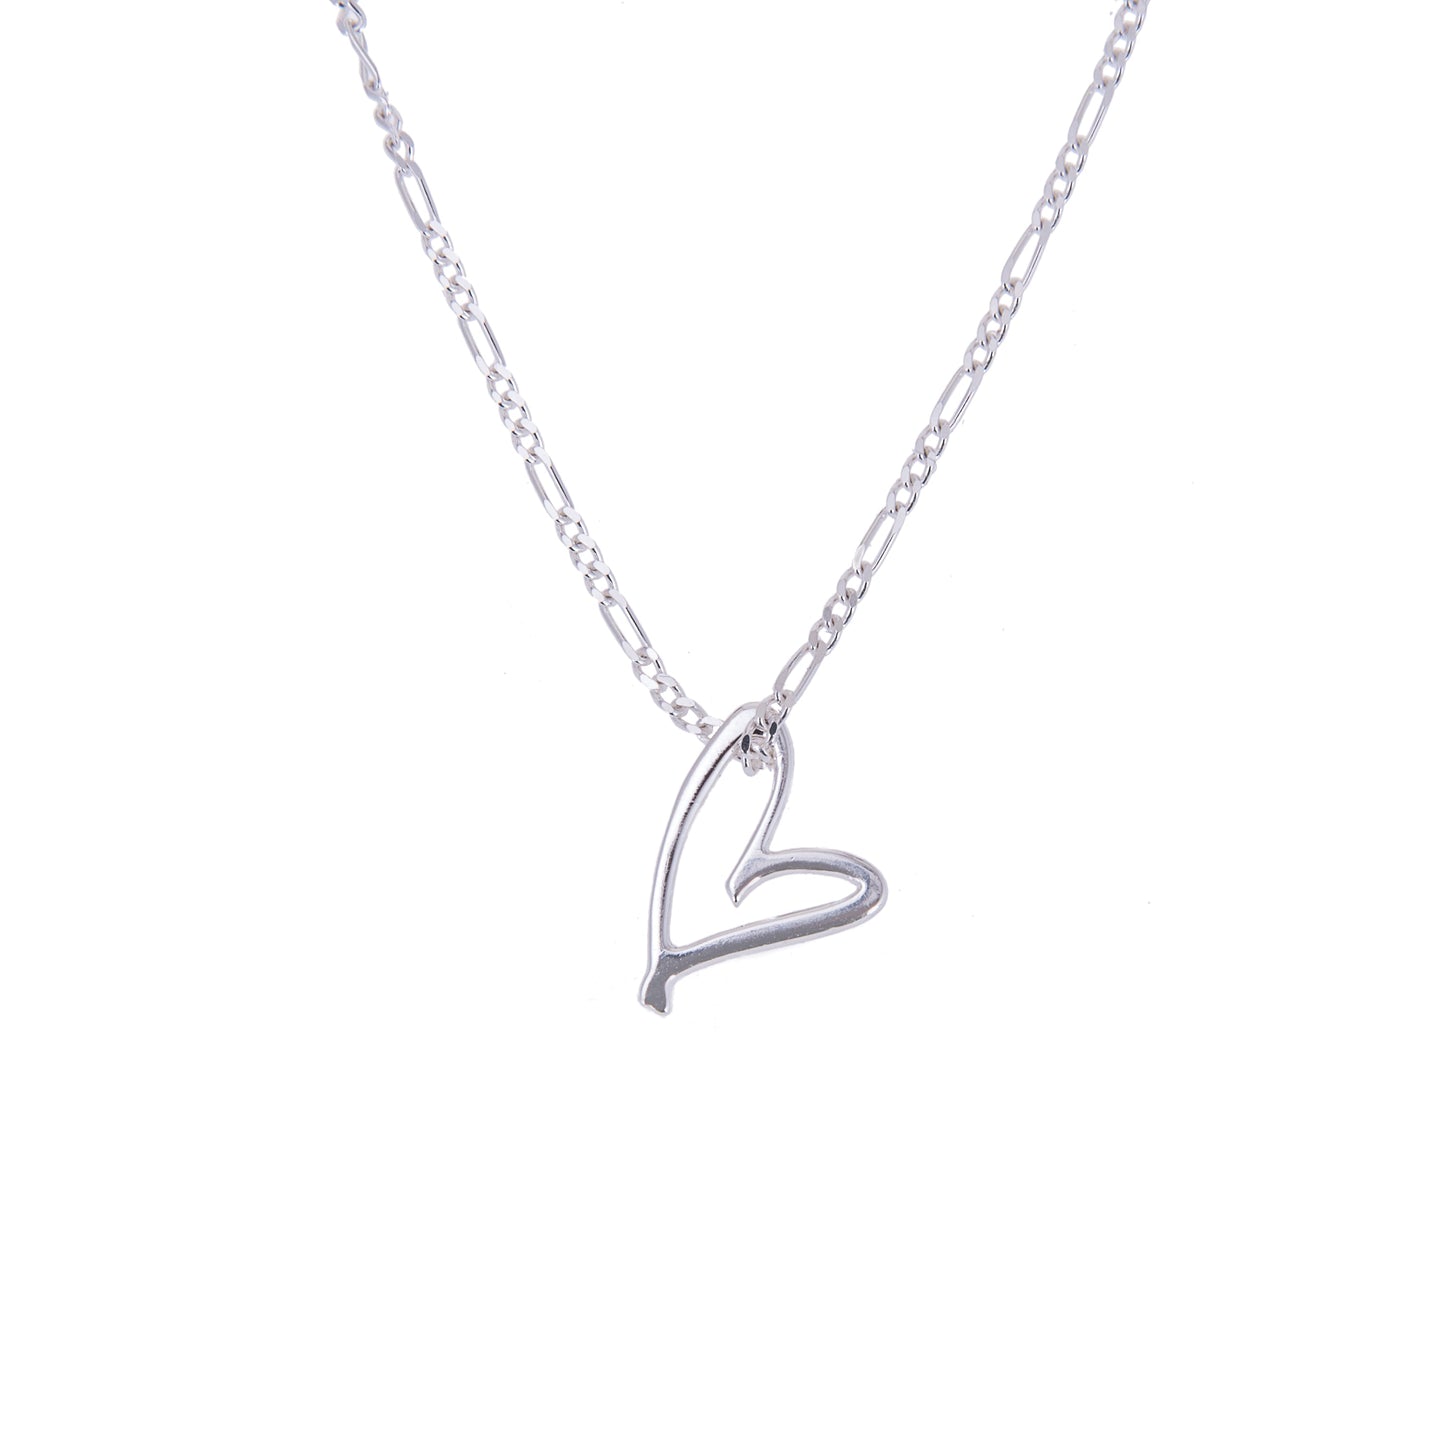 Sterling Silver Stylised Open Heart Necklace 14 - 32 Inches